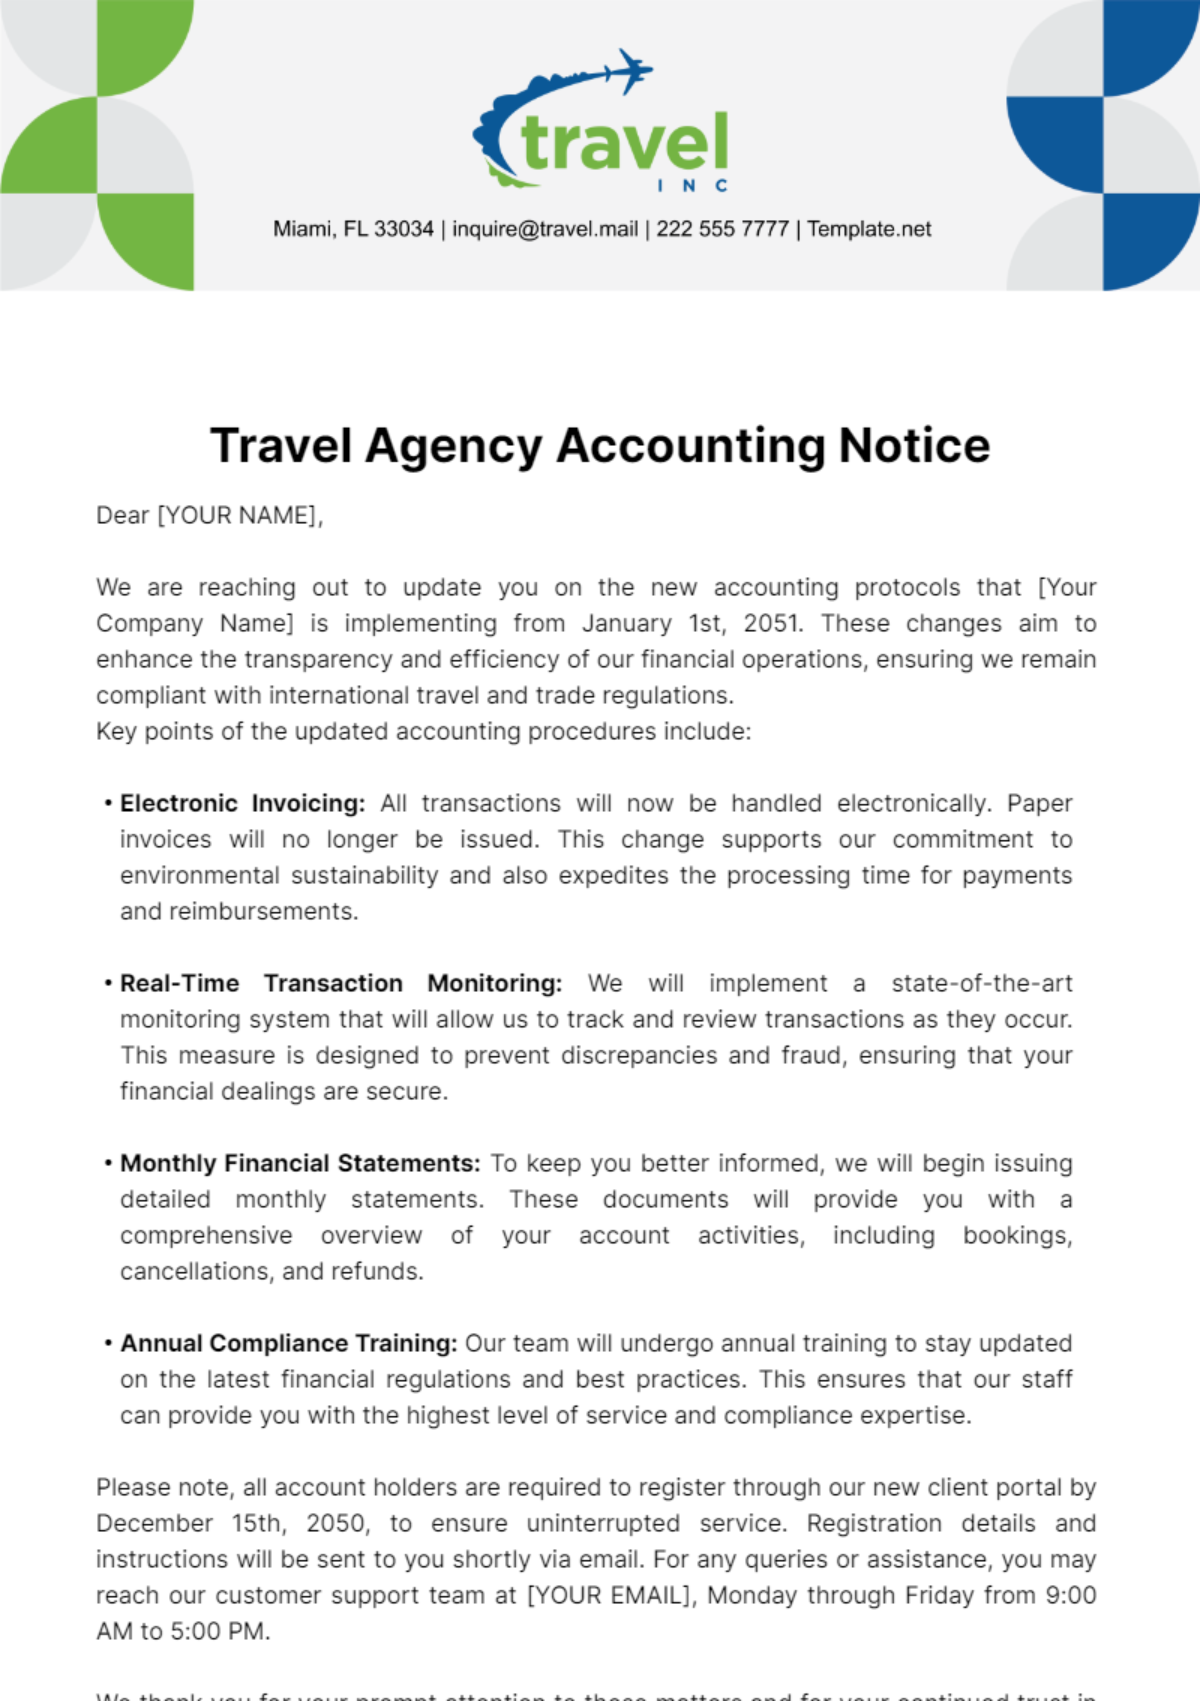 Free Travel Agency Accounting Notice Template